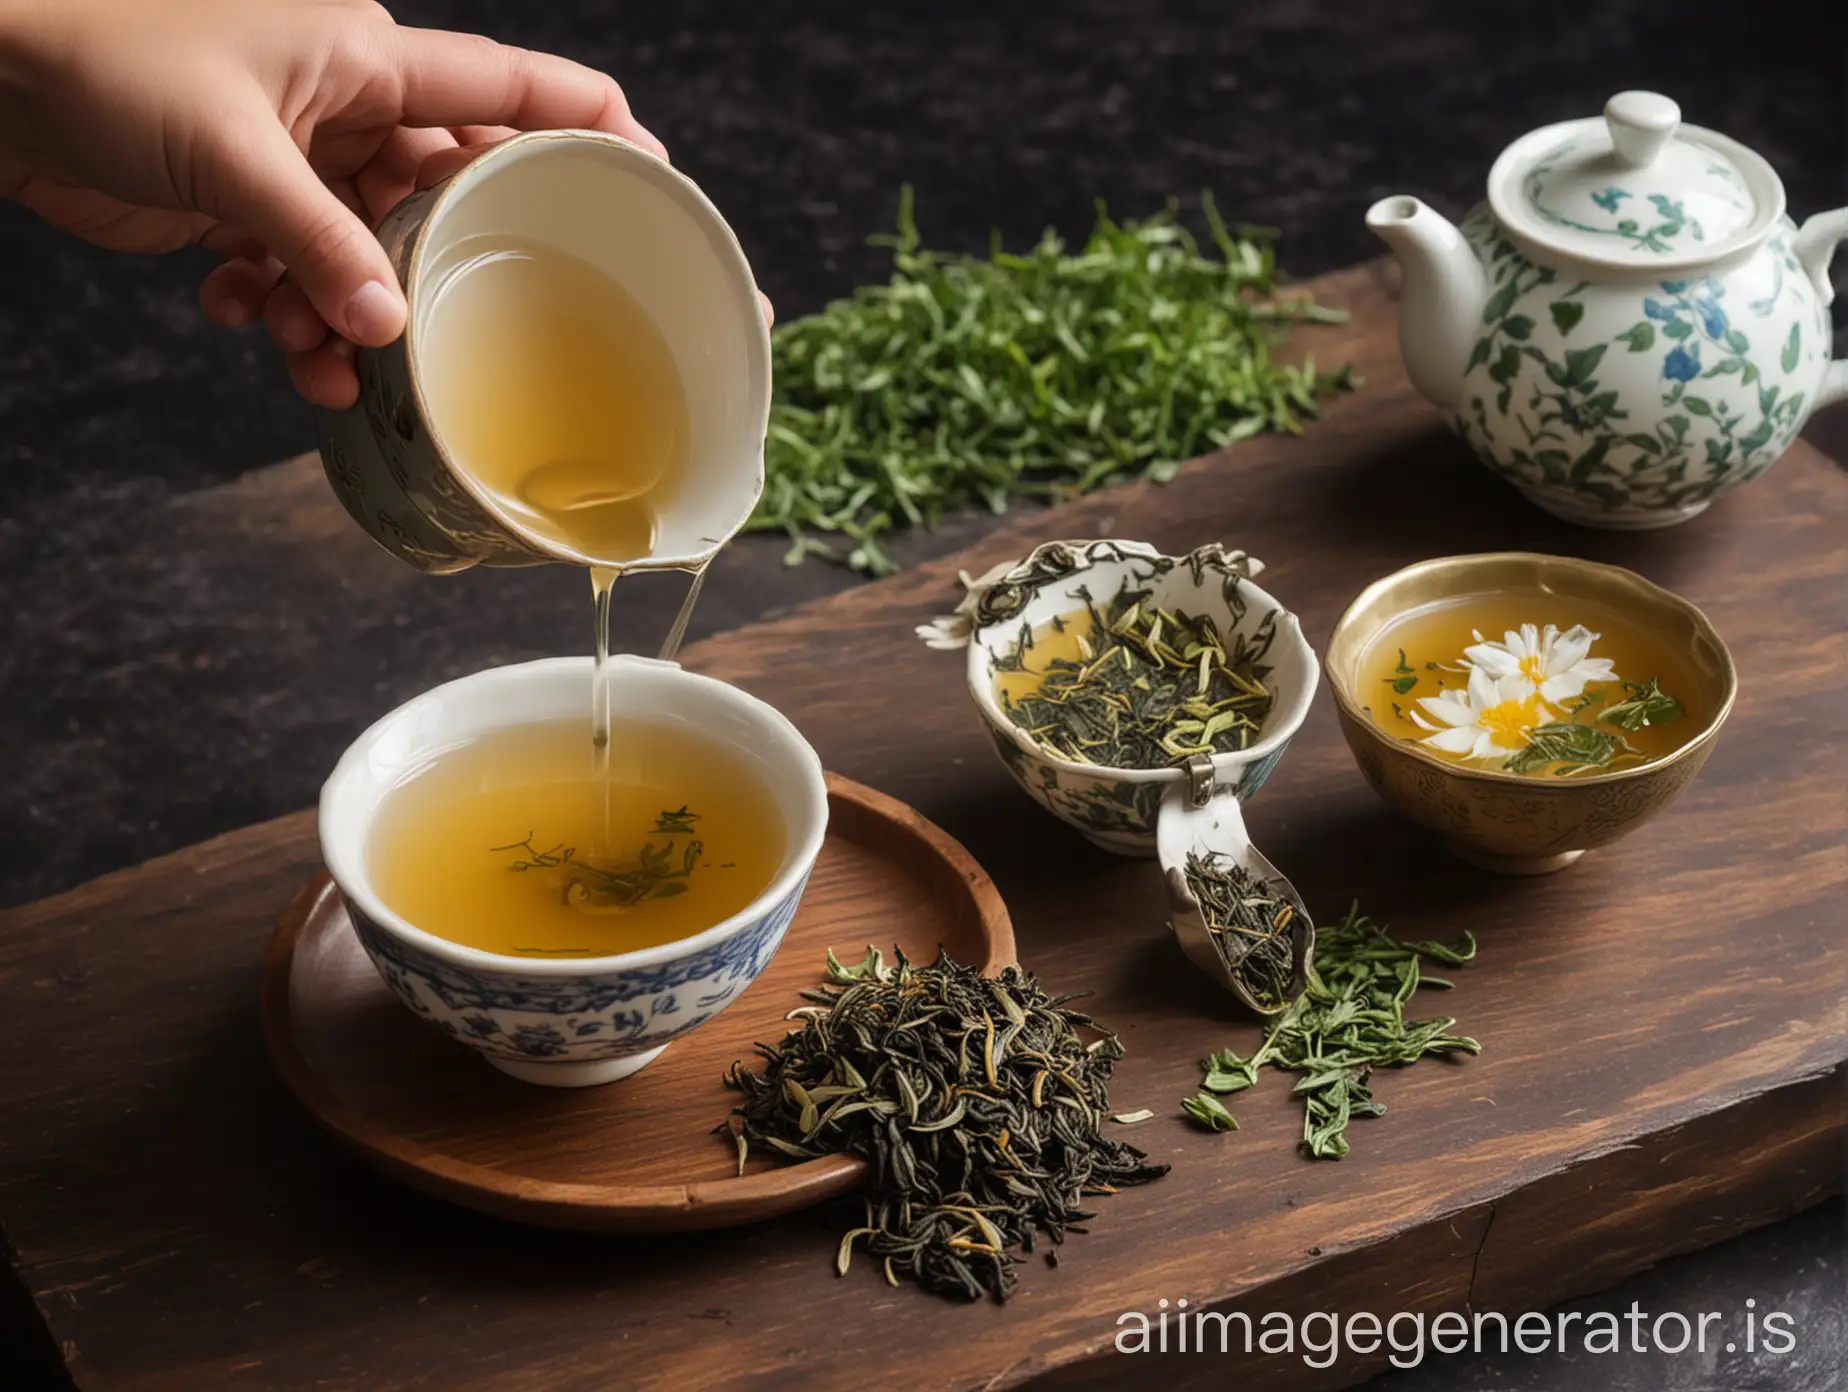 Scented tea is being brewed with tea leaves and scented tea soup on the side.